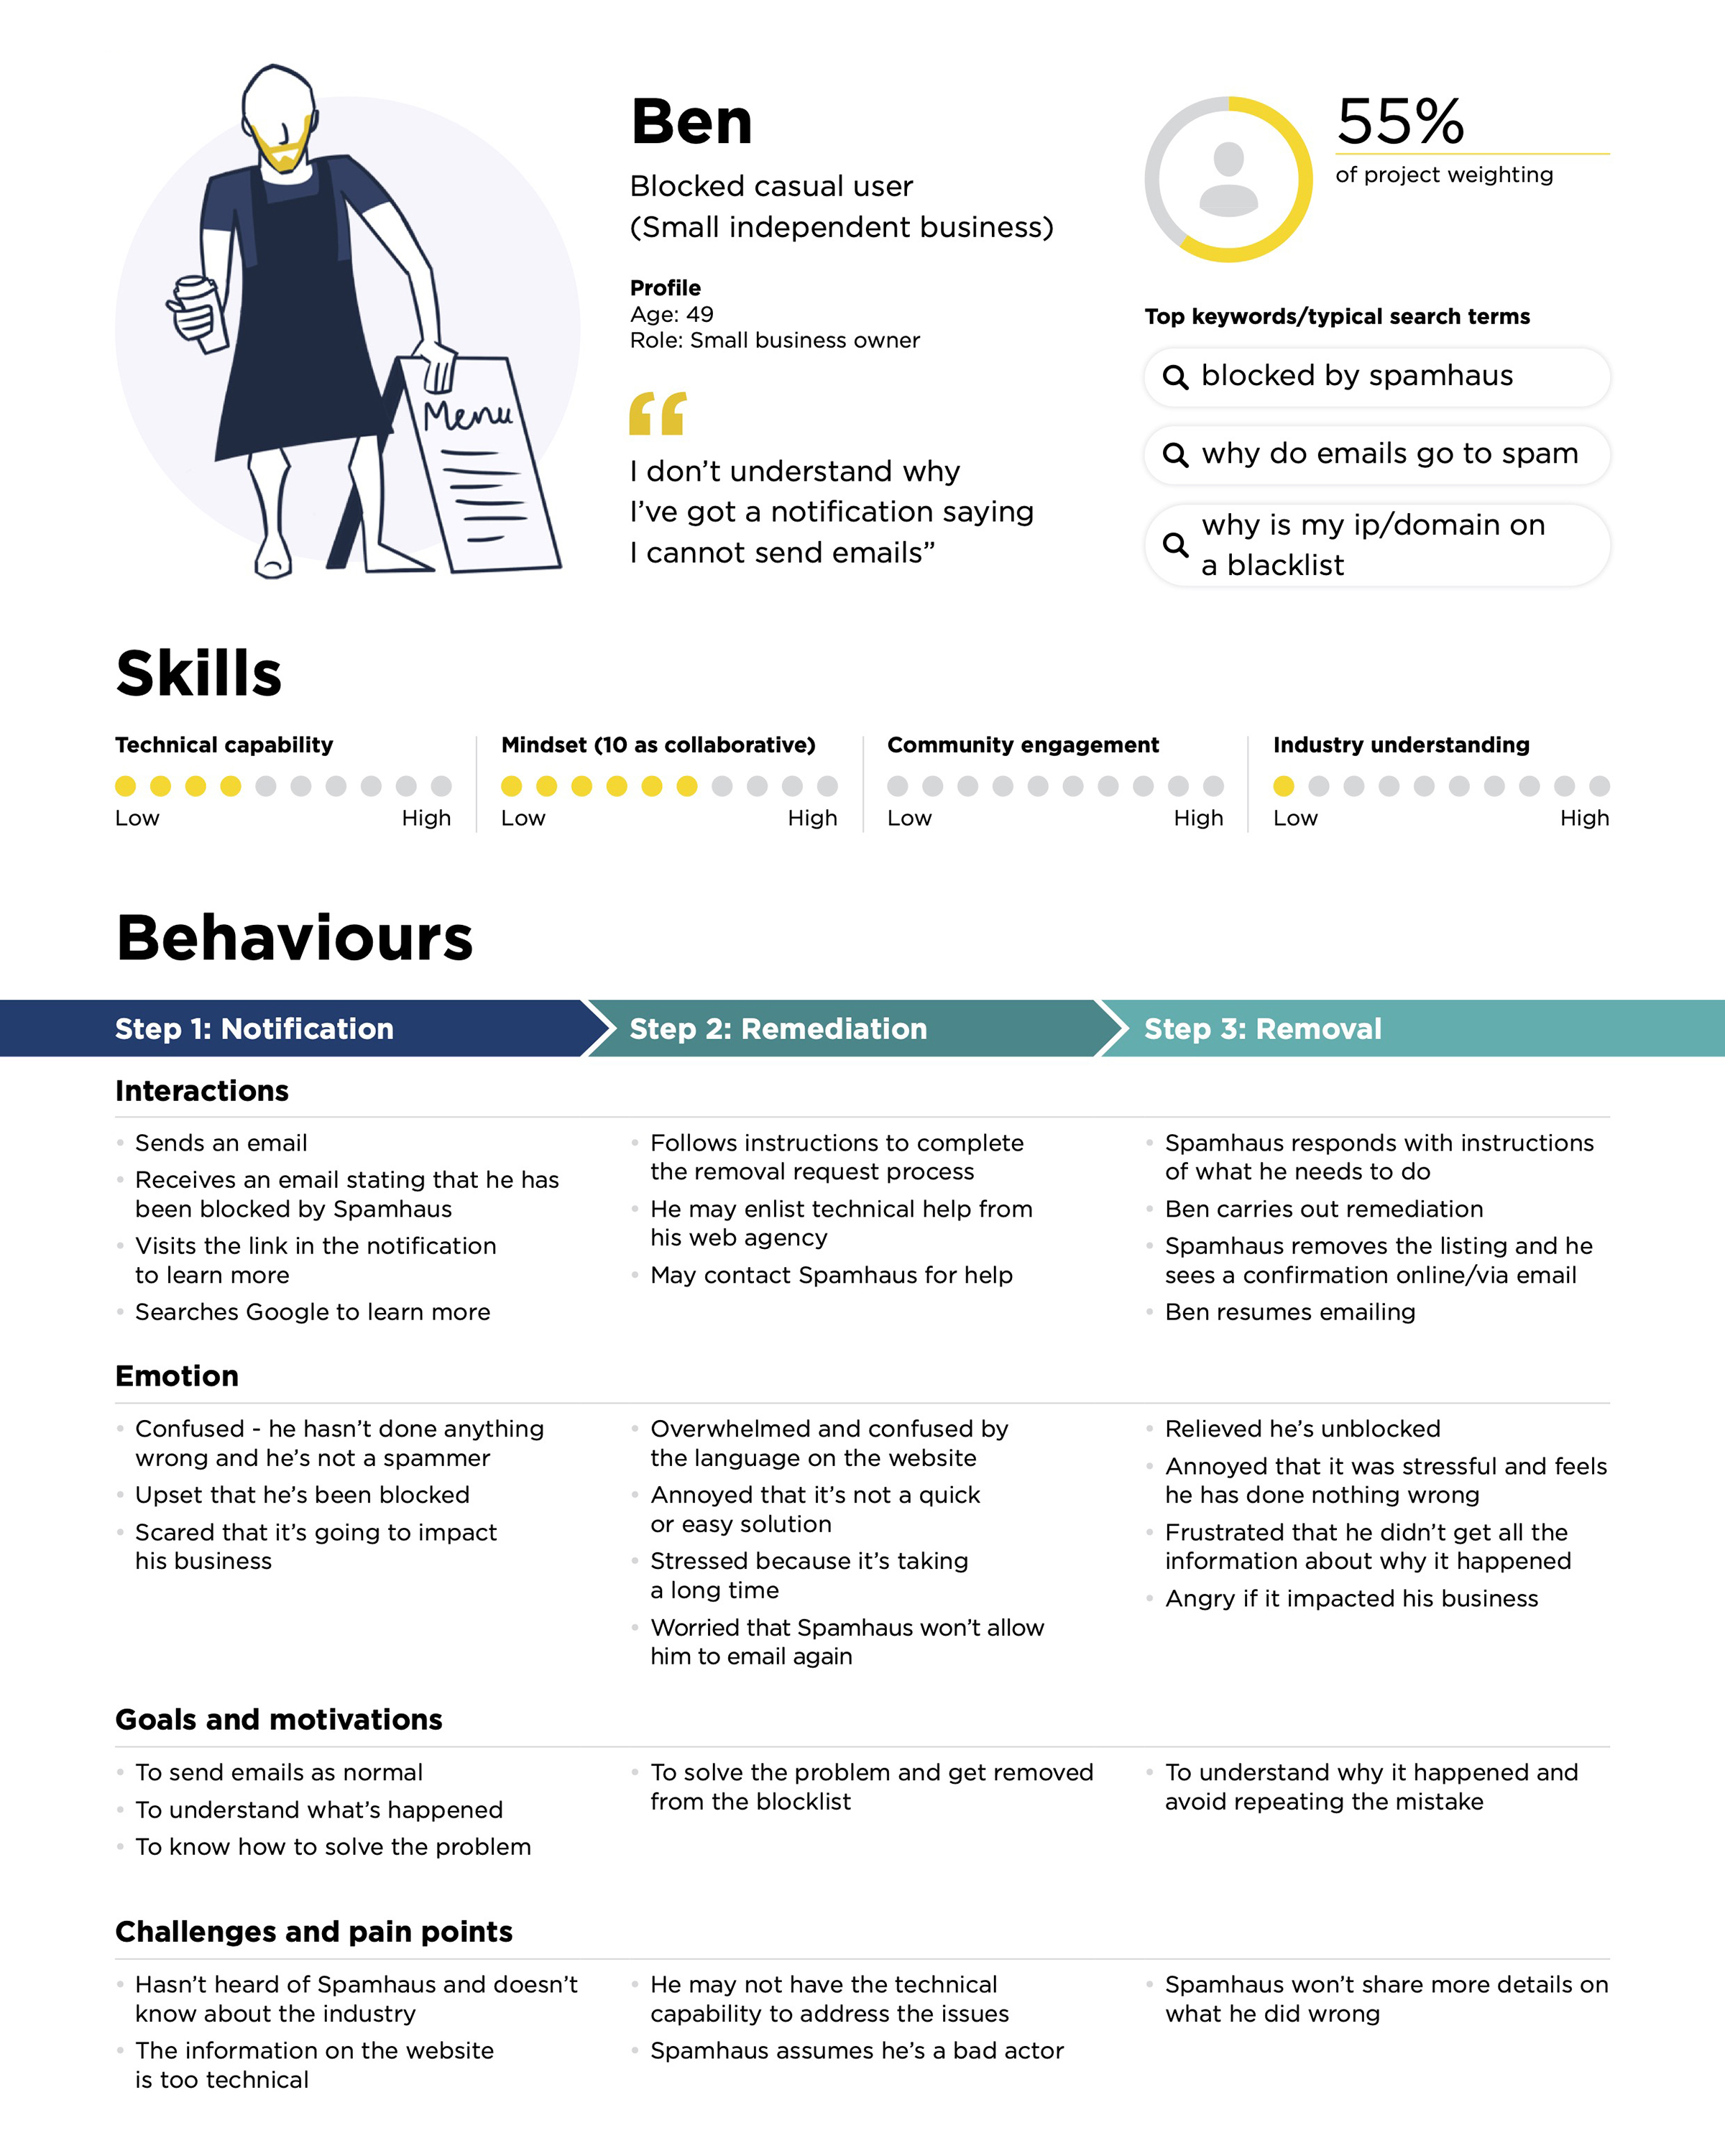 Persona profile listing typical interactions, emotions, goals and motivations, challenges and pain points for the casual user persona named Ben.